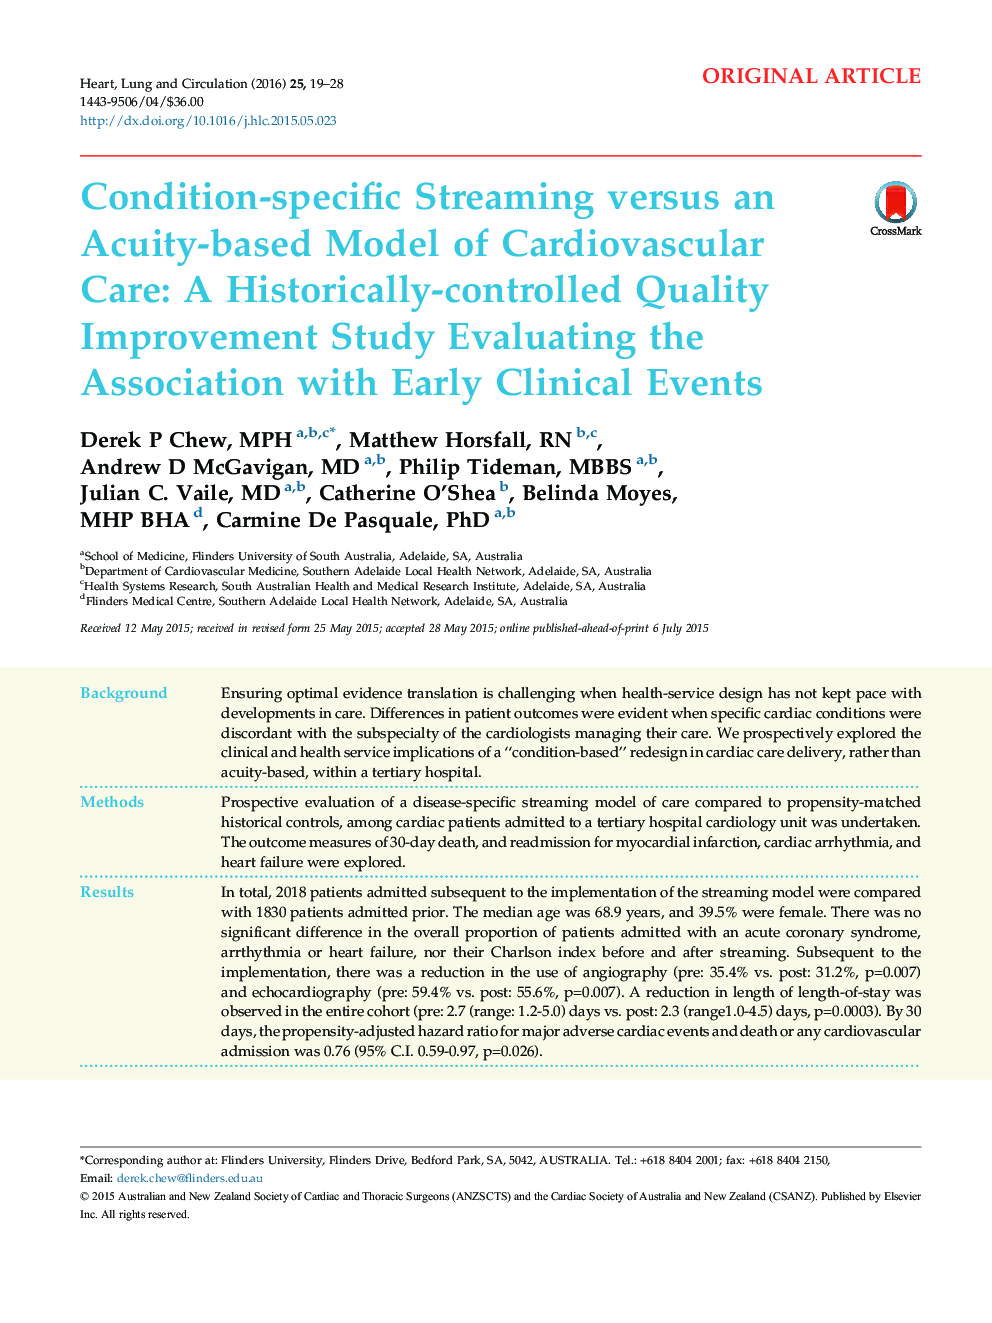 Condition-specific Streaming versus an Acuity-based Model of Cardiovascular Care: A Historically-controlled Quality Improvement Study Evaluating the Association with Early Clinical Events